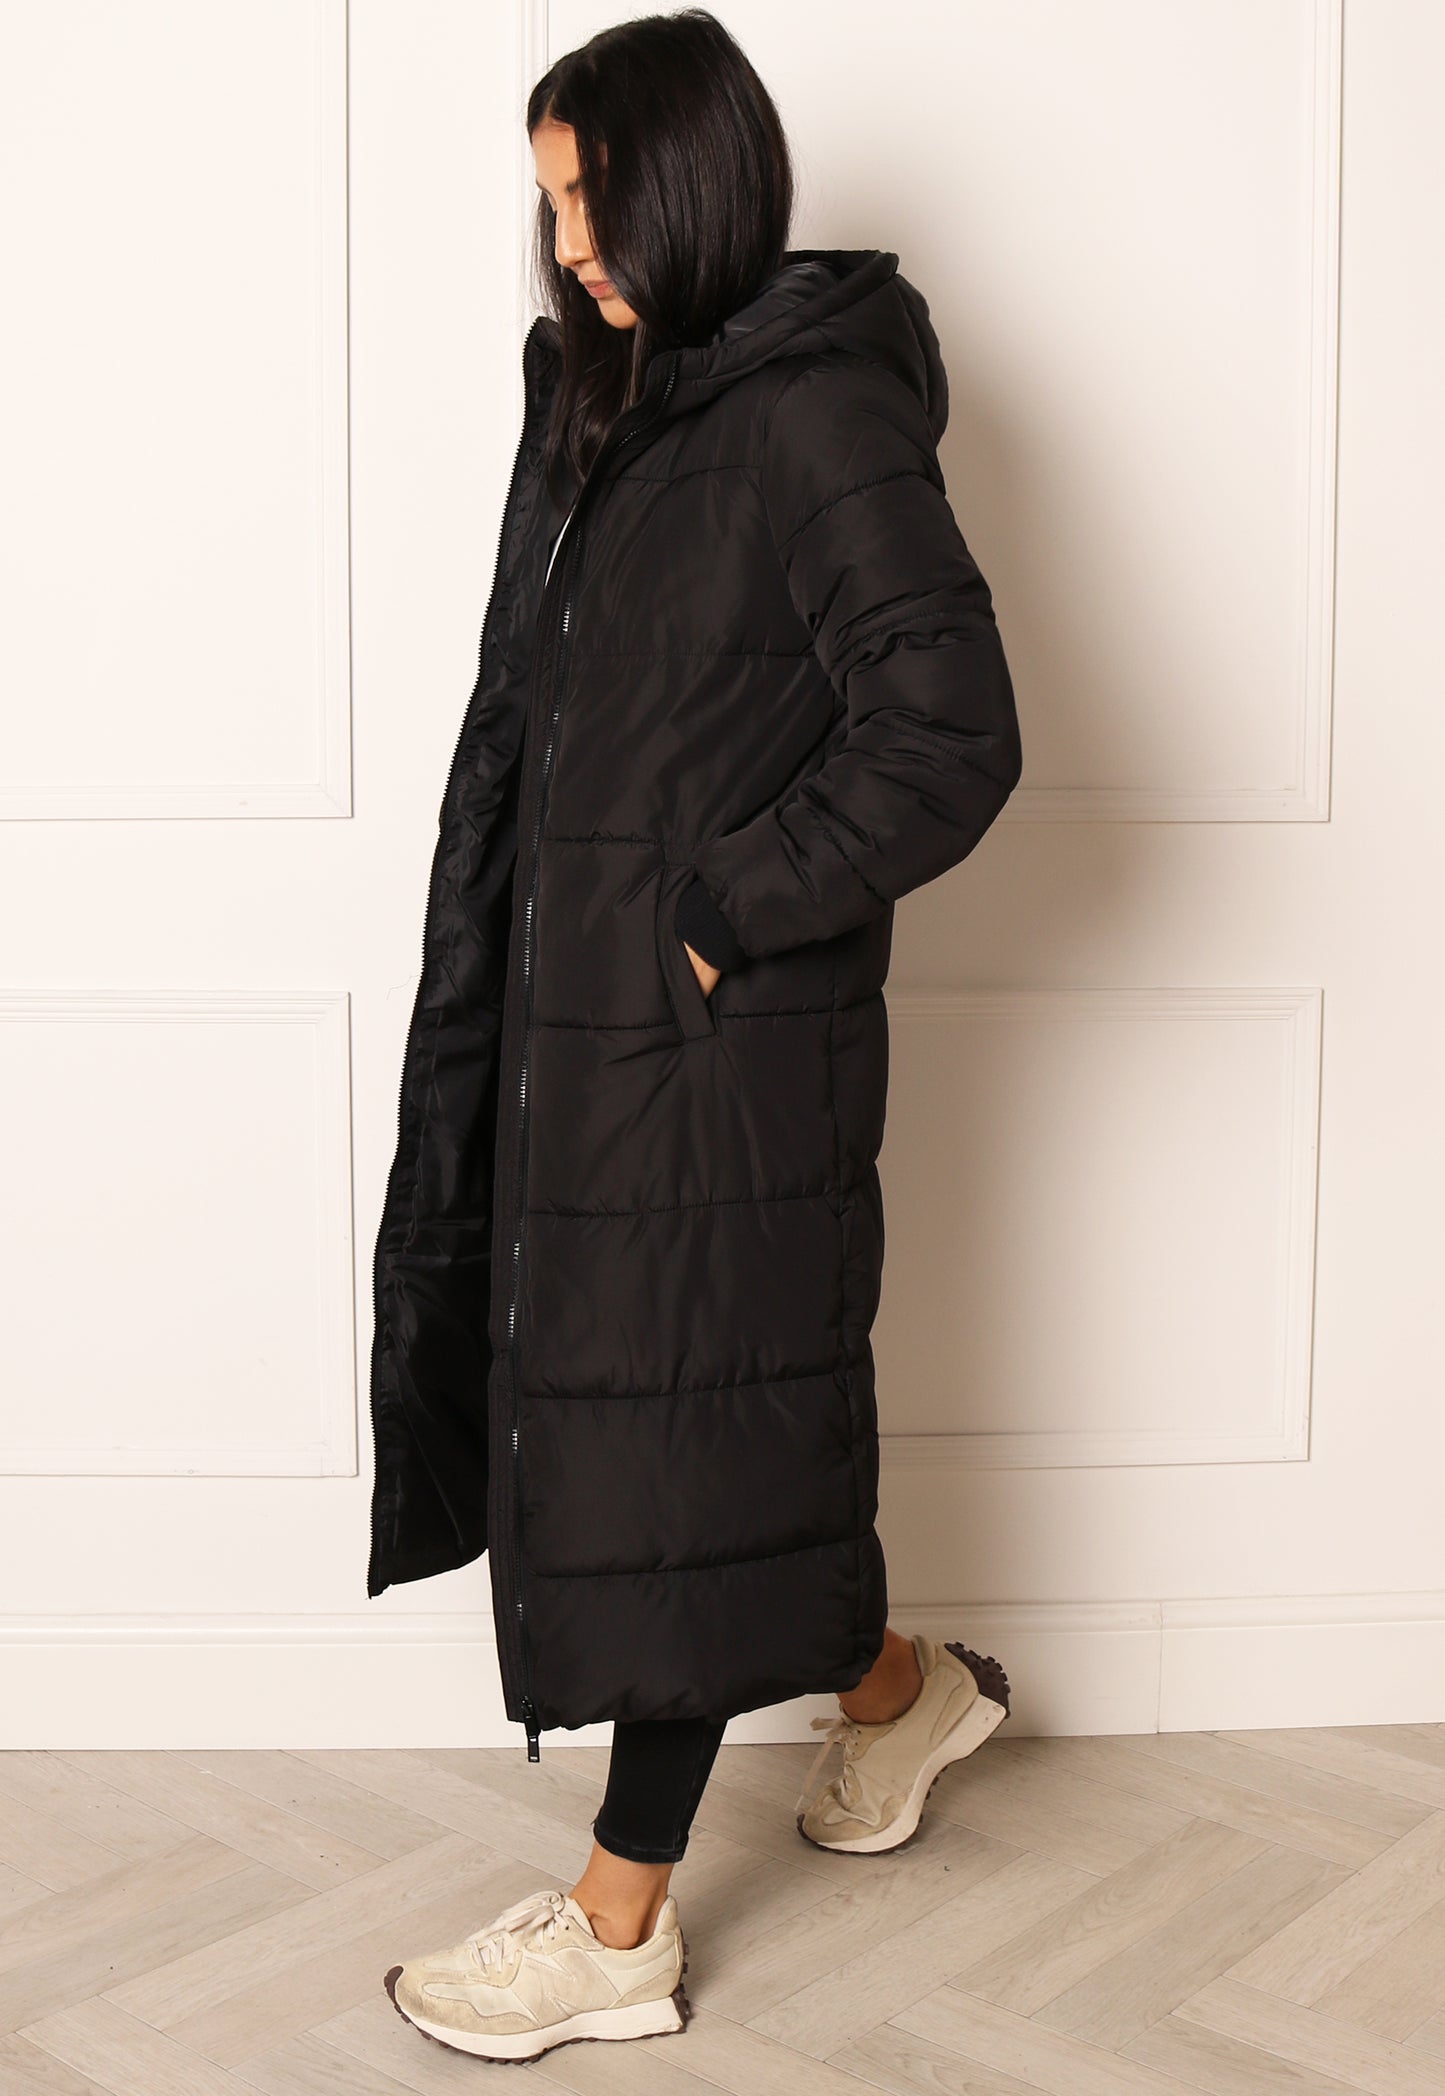 PIECES Bee Midi Longline Hooded Padded Puffer Coat in Black - One Nation Clothing